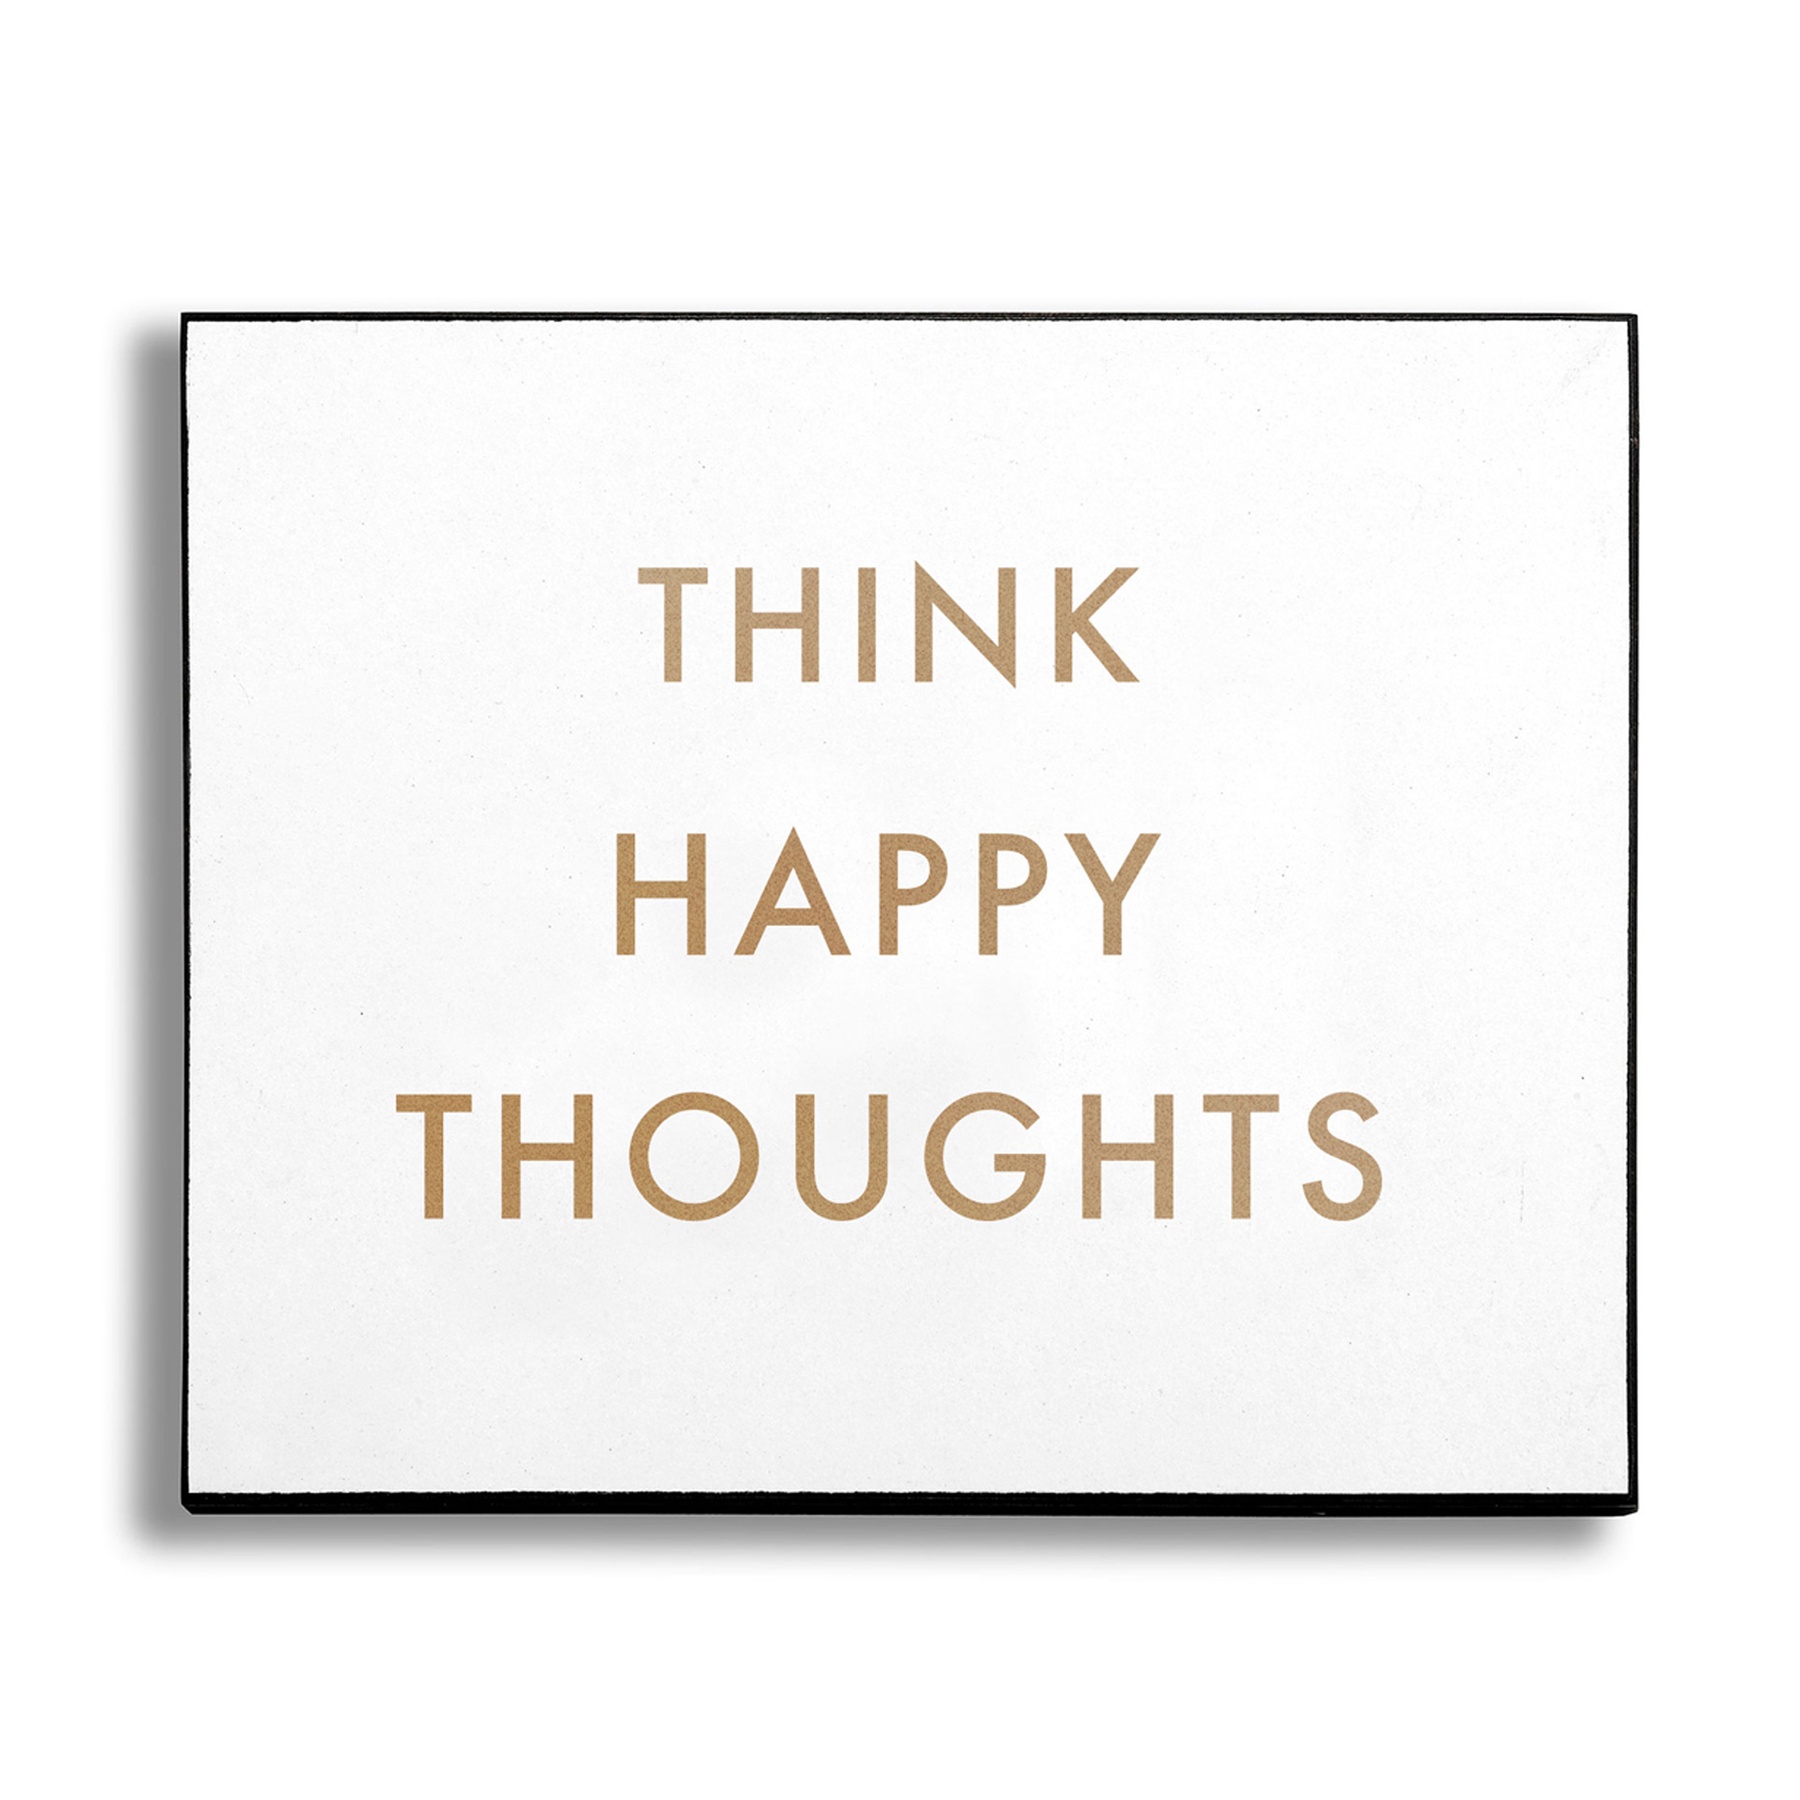 Think Happy Thoughts Gold Foil Plaque